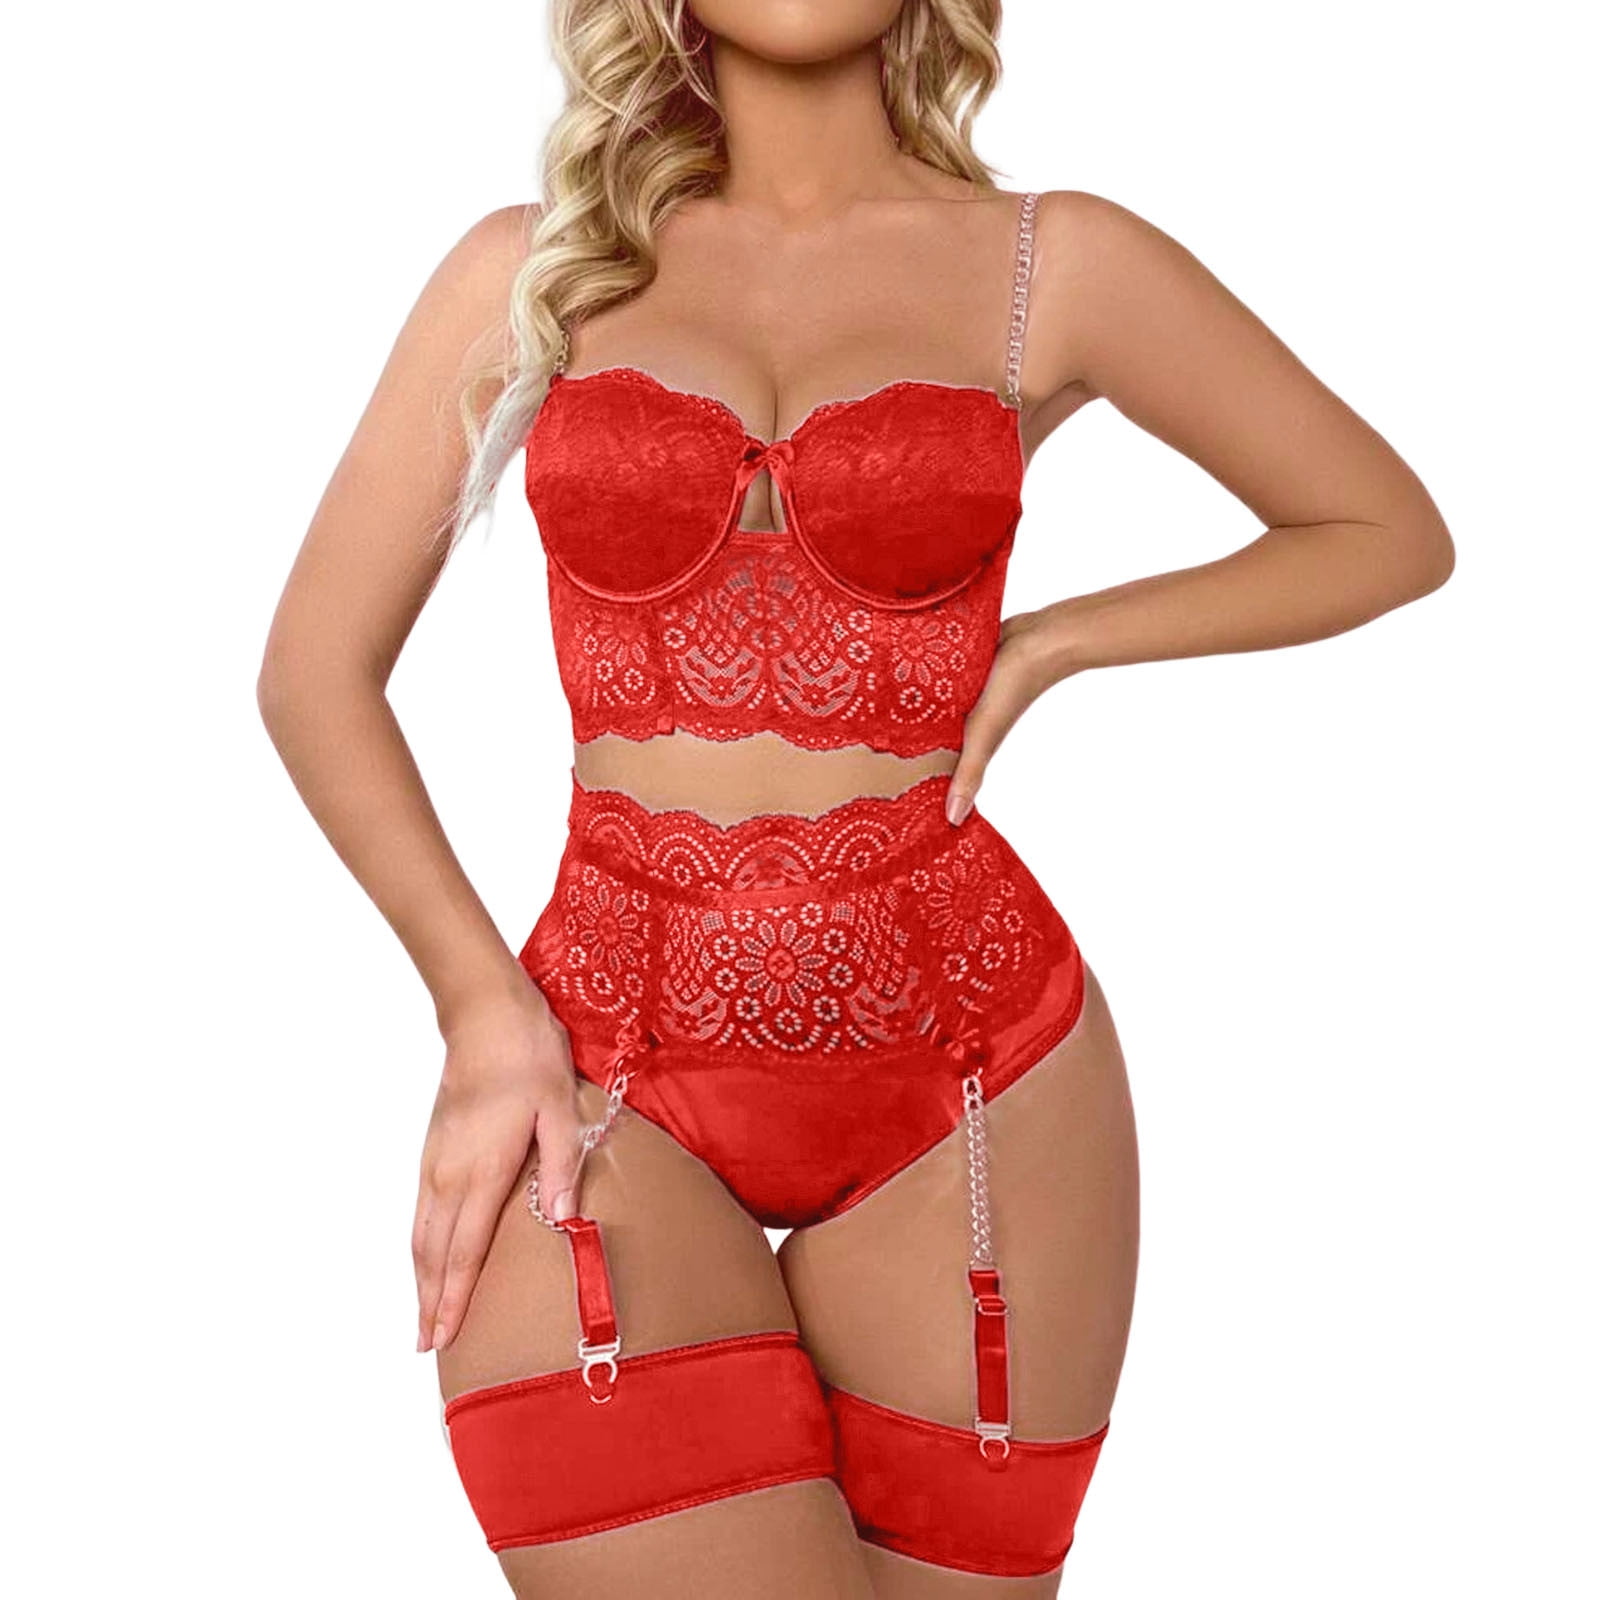 PMUYBHF Women Lingerie Lace Crochet Cutout Embroidery Bra and High Waist  Panty Set Push Up Sets Athartle Bodysuit Lingerie for Women with Stockings